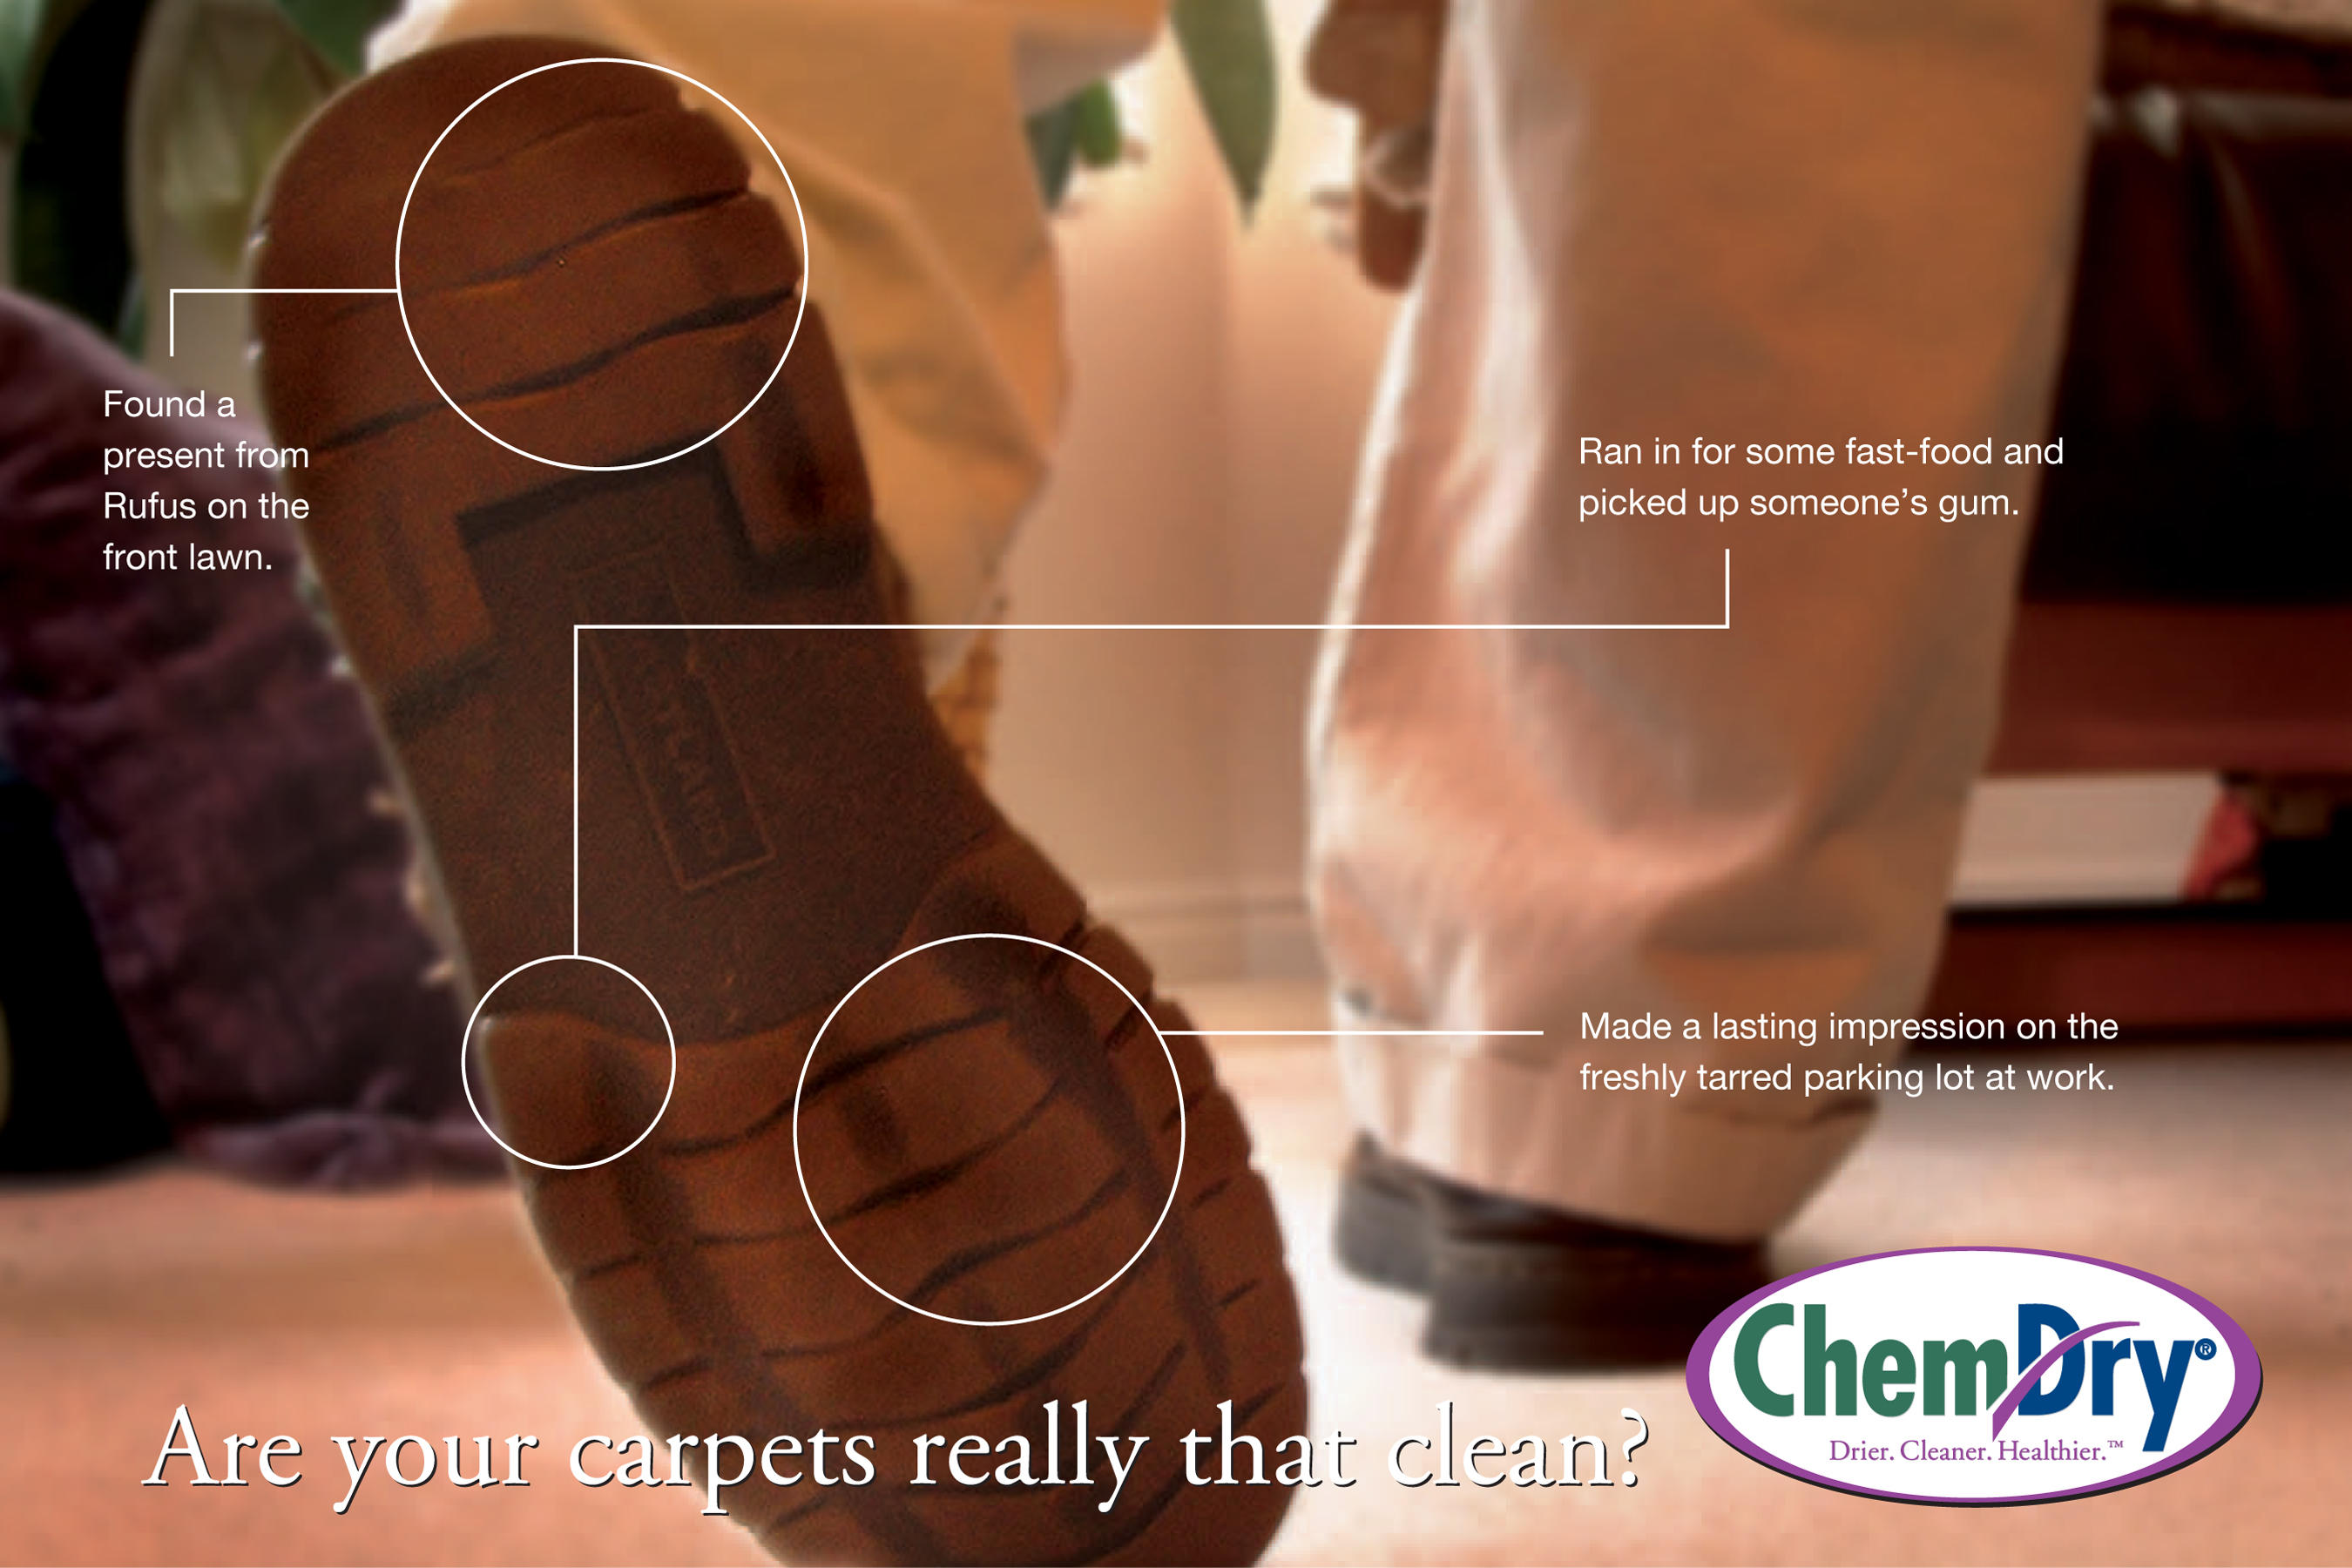 Your shoes bring a lot of dirt into your home. Zachary's Chem-Dry will help take that grime back out Zachary's Chem-Dry Jacksonville (904)620-7310